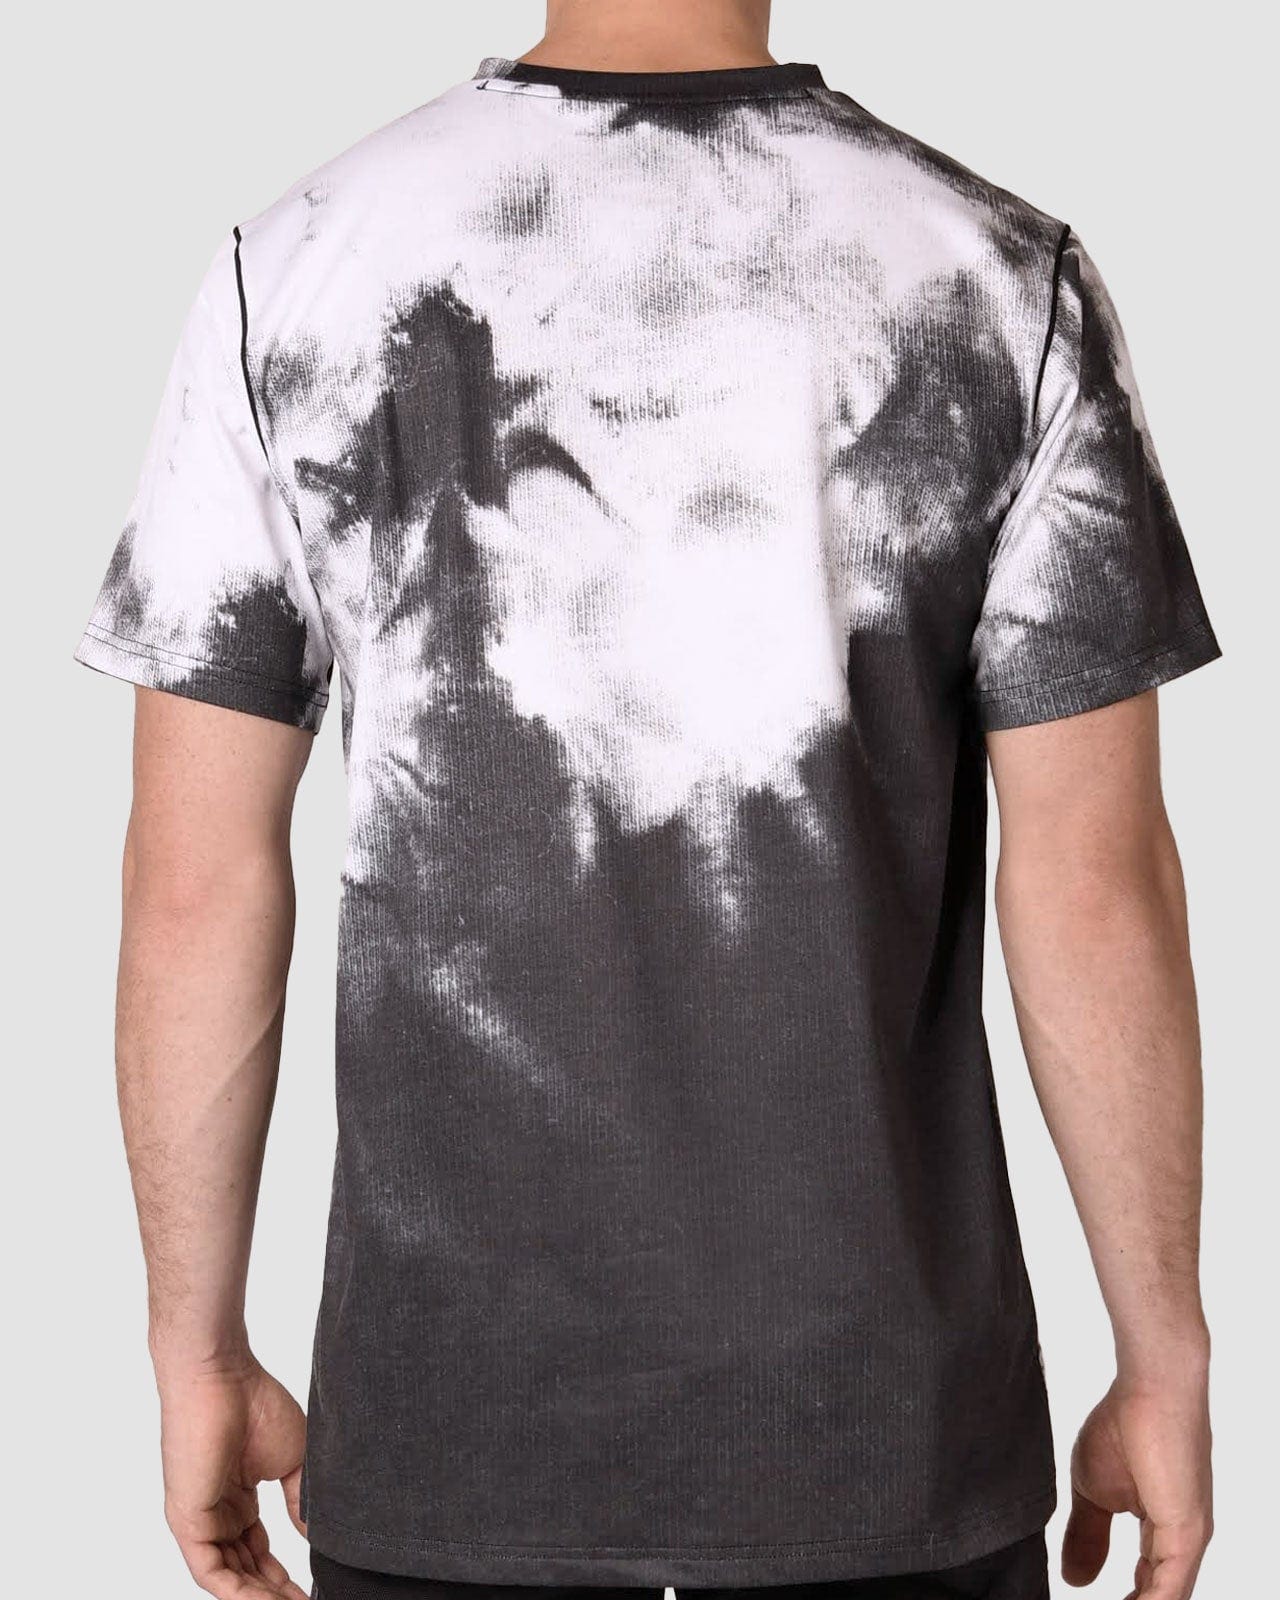 Manufactory Apparel Physical product Electrix DryTECH T-Shirt